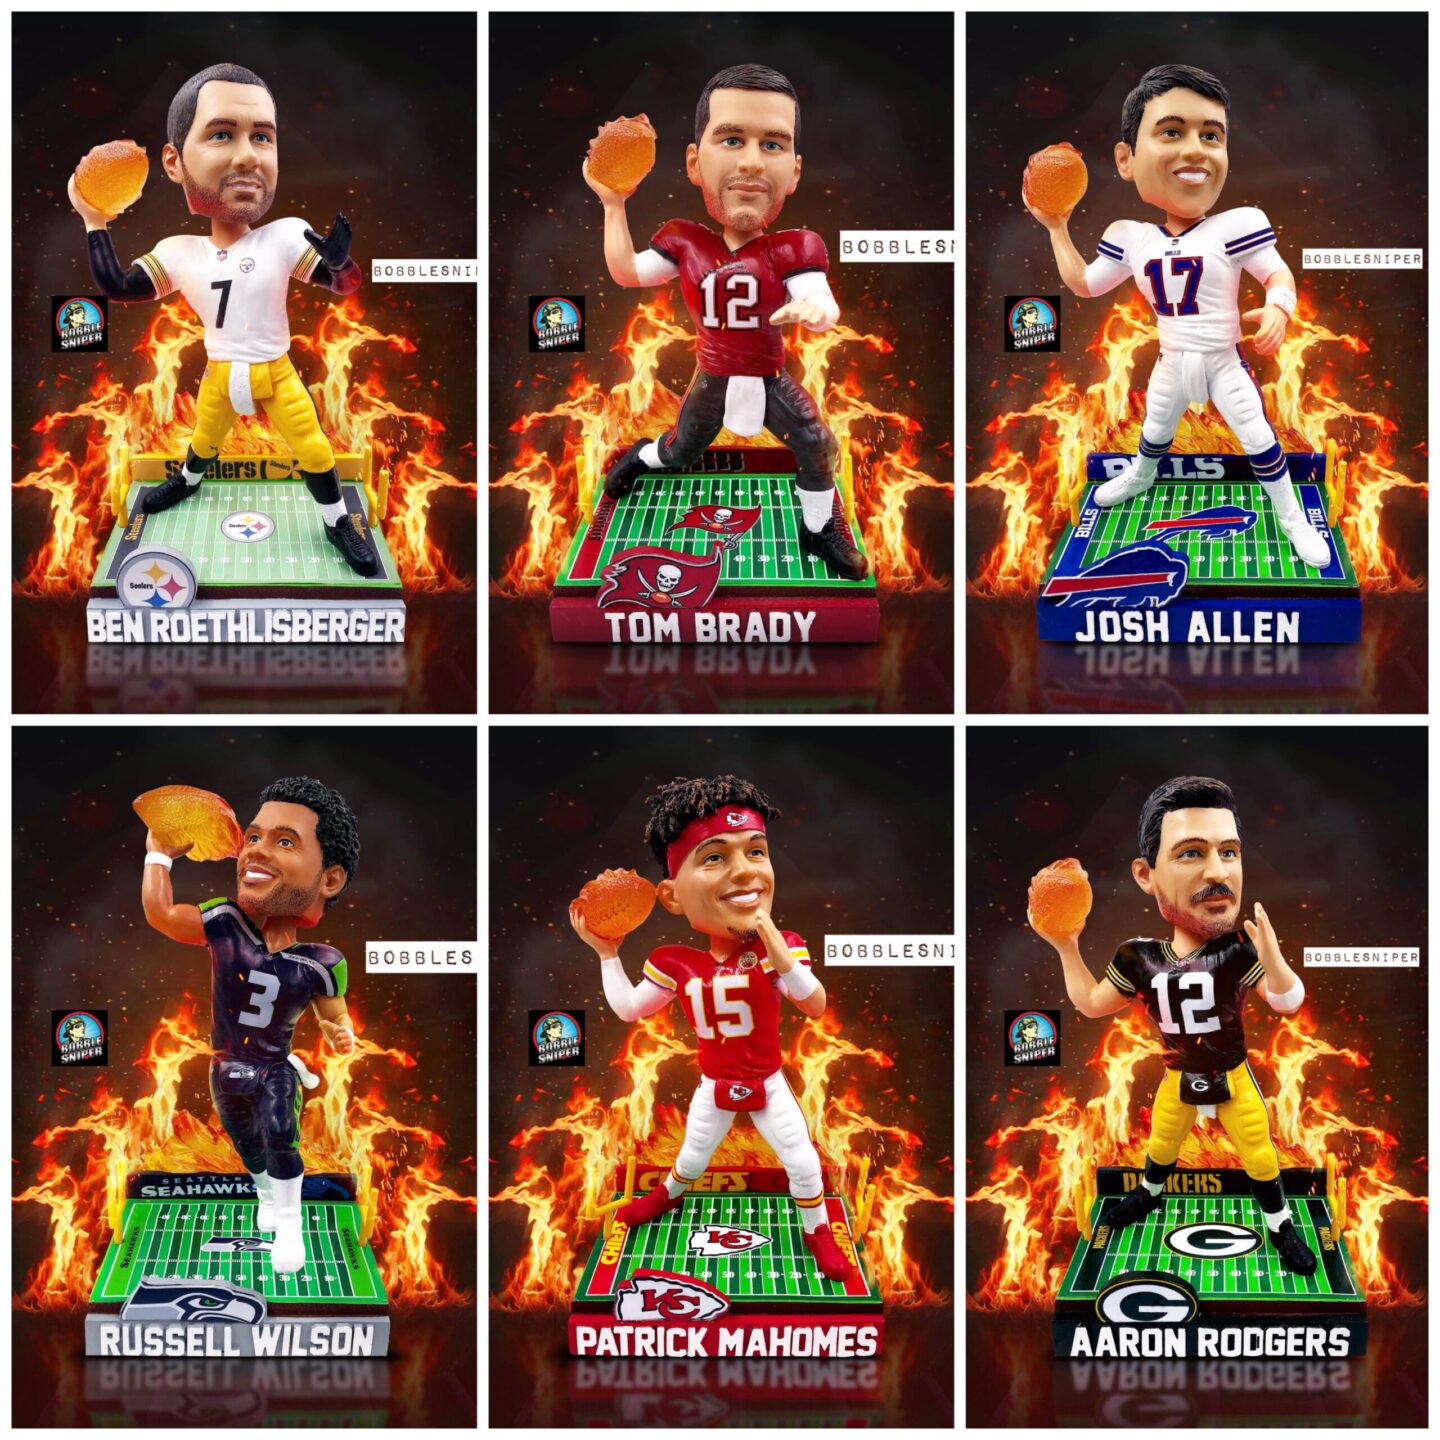 FOCO STAYS HOT WITH A NEW LINE OF NFL “ON FIRE” BOBBLEHEADS